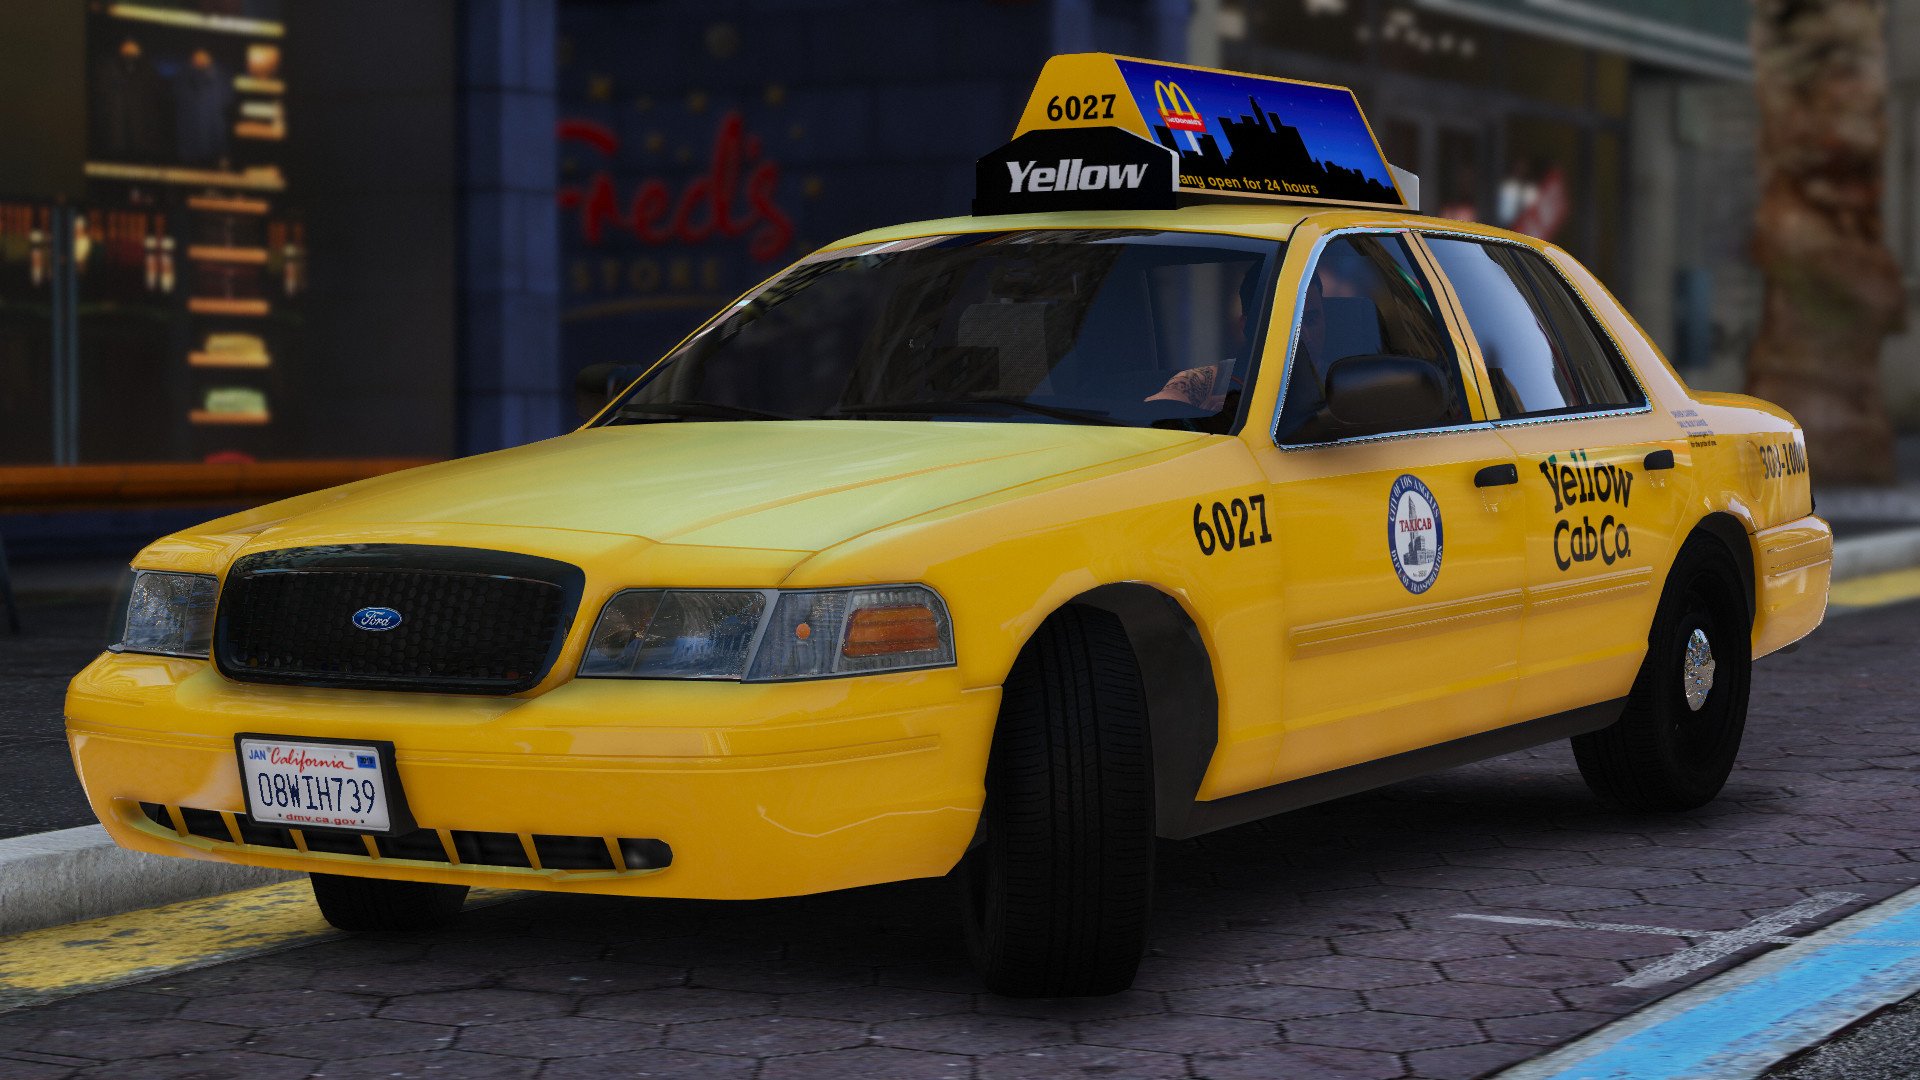 Taxi life моды. Ford Crown Victoria 2011 Taxi. Машина Ford Crown Victoria такси. GTA 5 Ford Crown Victoria 2011 Taxi. Ford Crown Victoria Taxi ГТА 5.